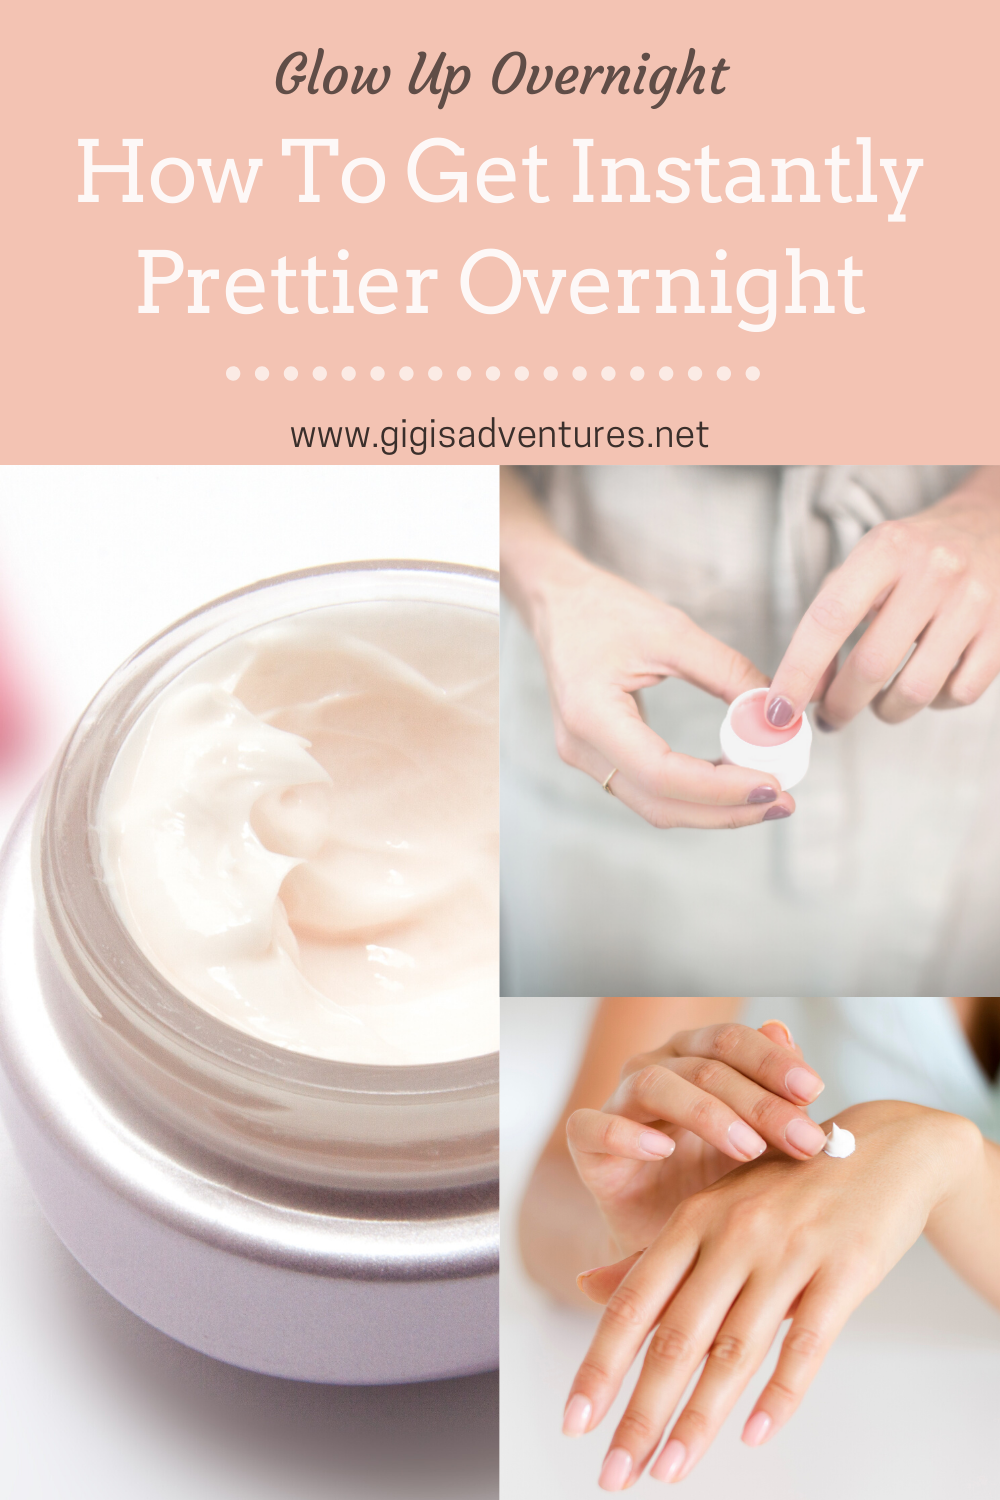 How To Get Instantly Prettier Overnight - My Best Tips (On A Budget!)